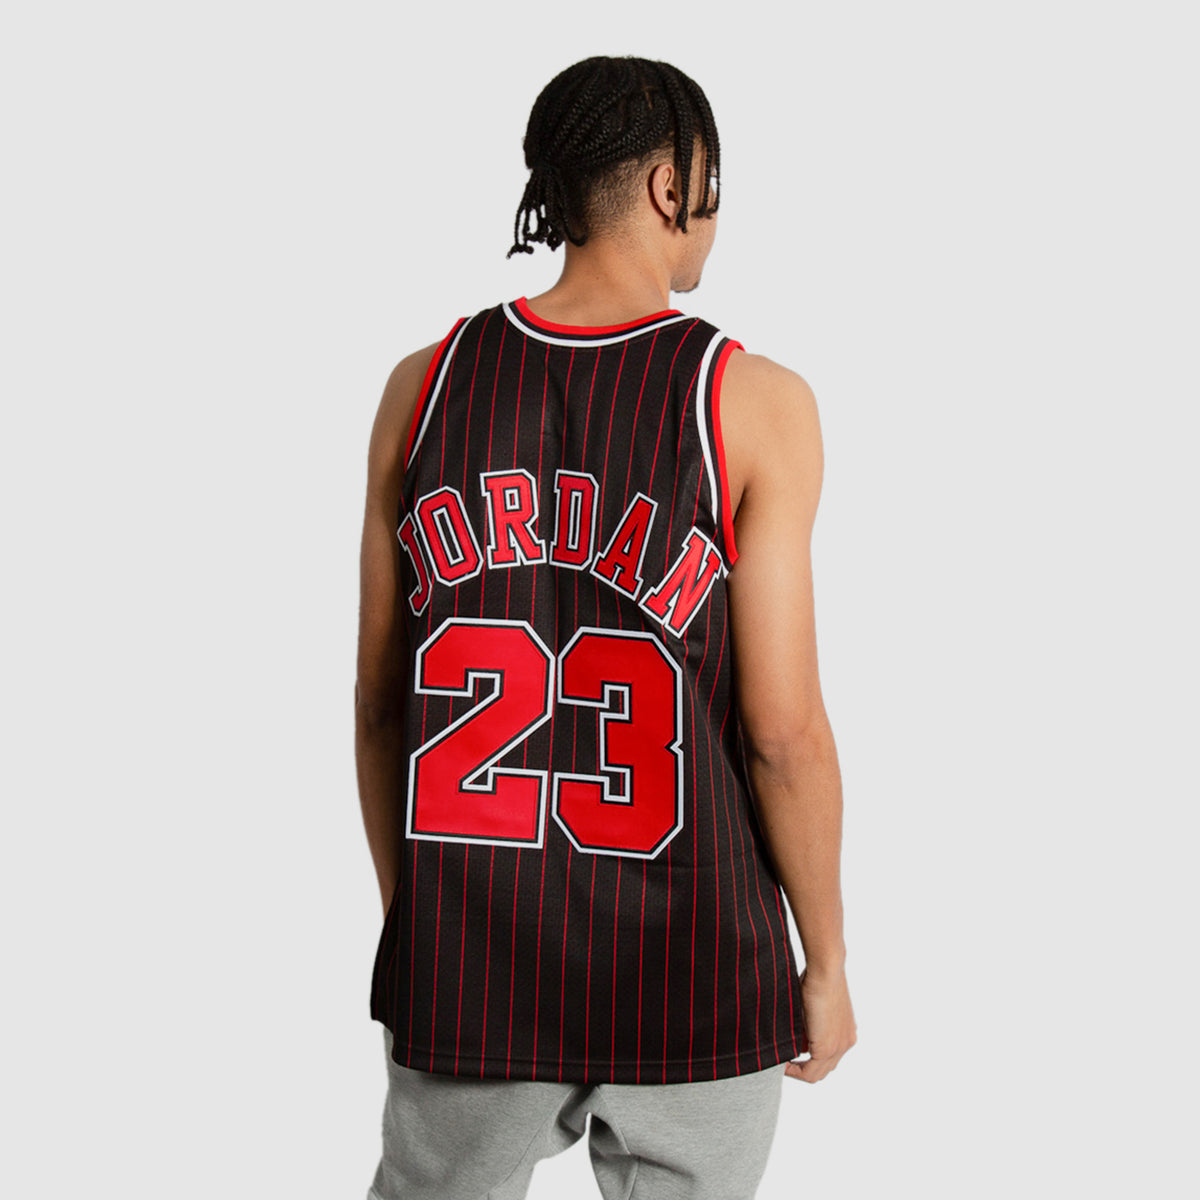 Mitchell & Ness: New Release - Pippen and Rodman 1996-97 Chicago Bulls  Pinstripe Jerseys - Shop Now